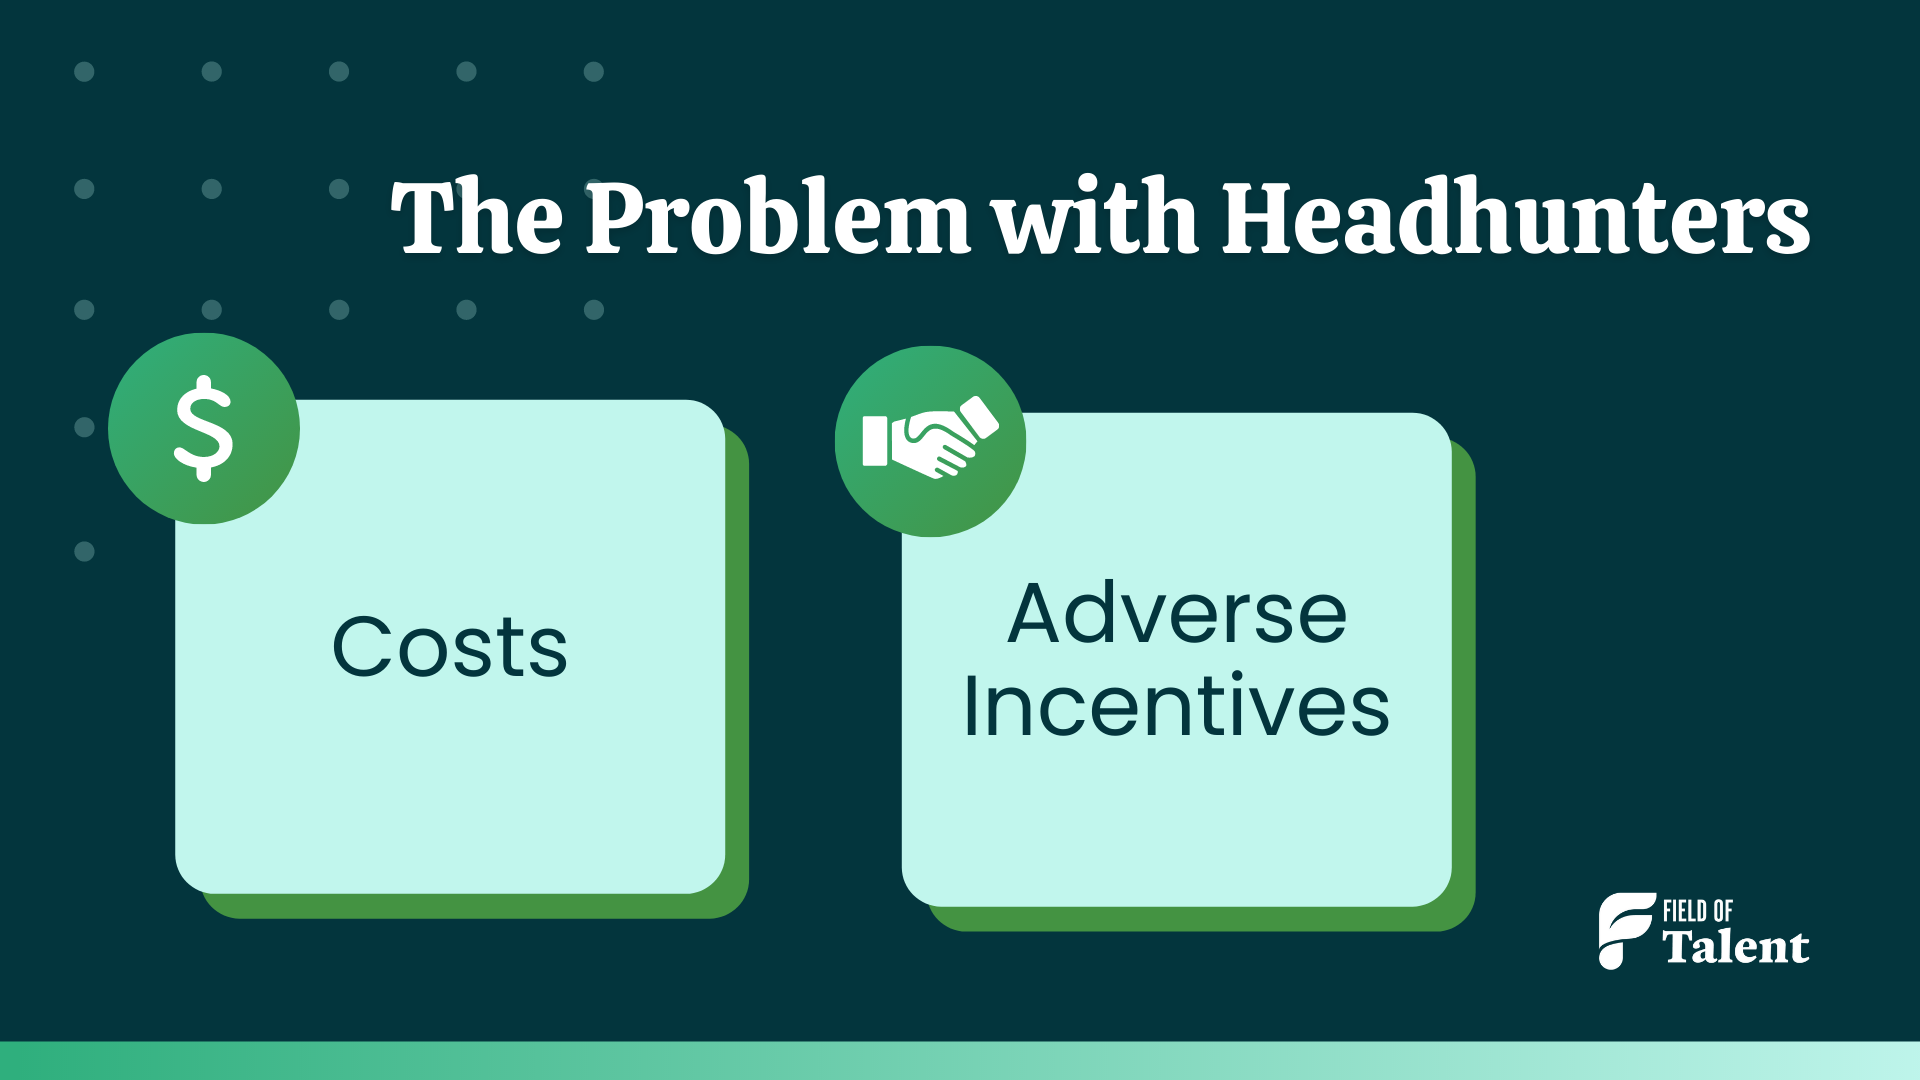 Problems with headhunters – Costs and Adverse Incentives